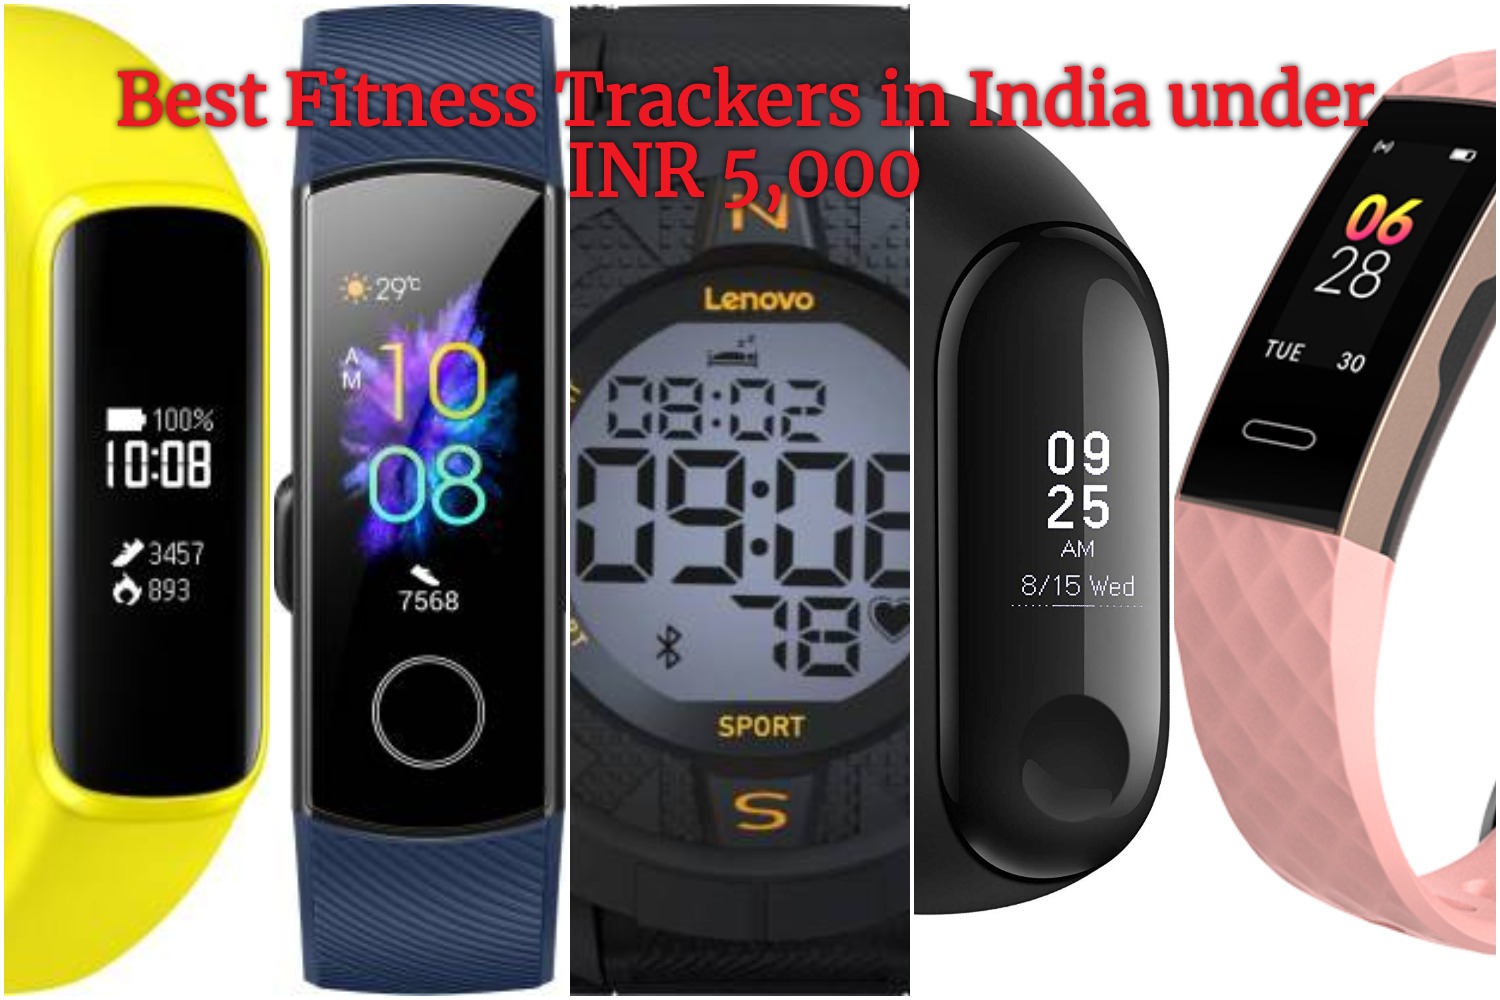 Best Fitness Trackers in India under INR 5,000